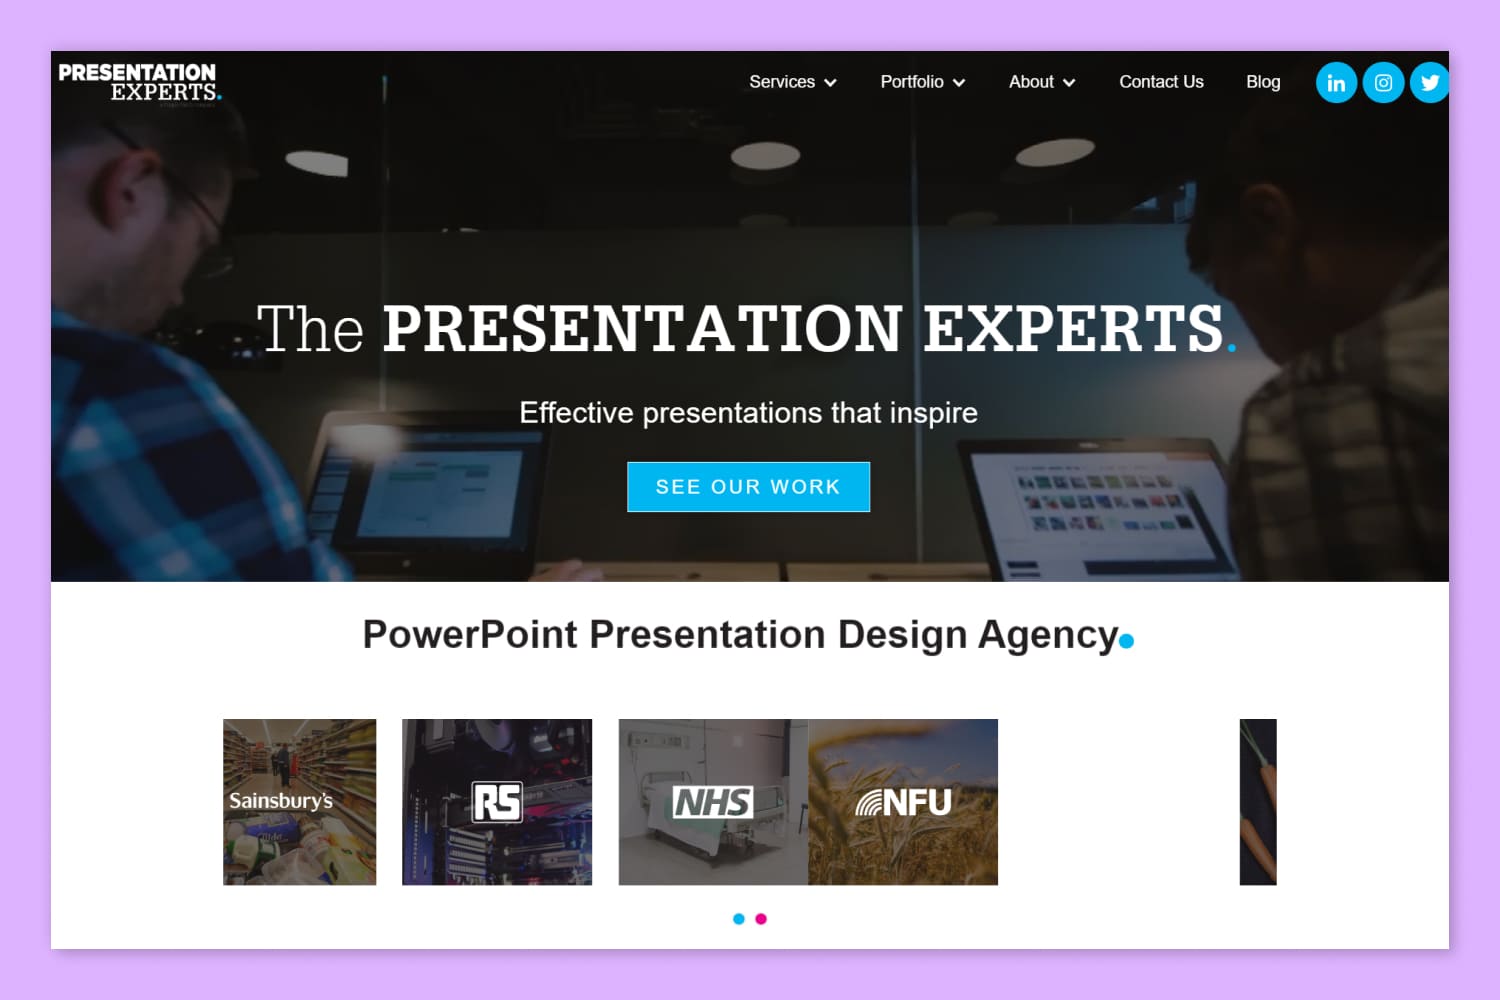 Screenshot of the main page of the site Presentation Experts .